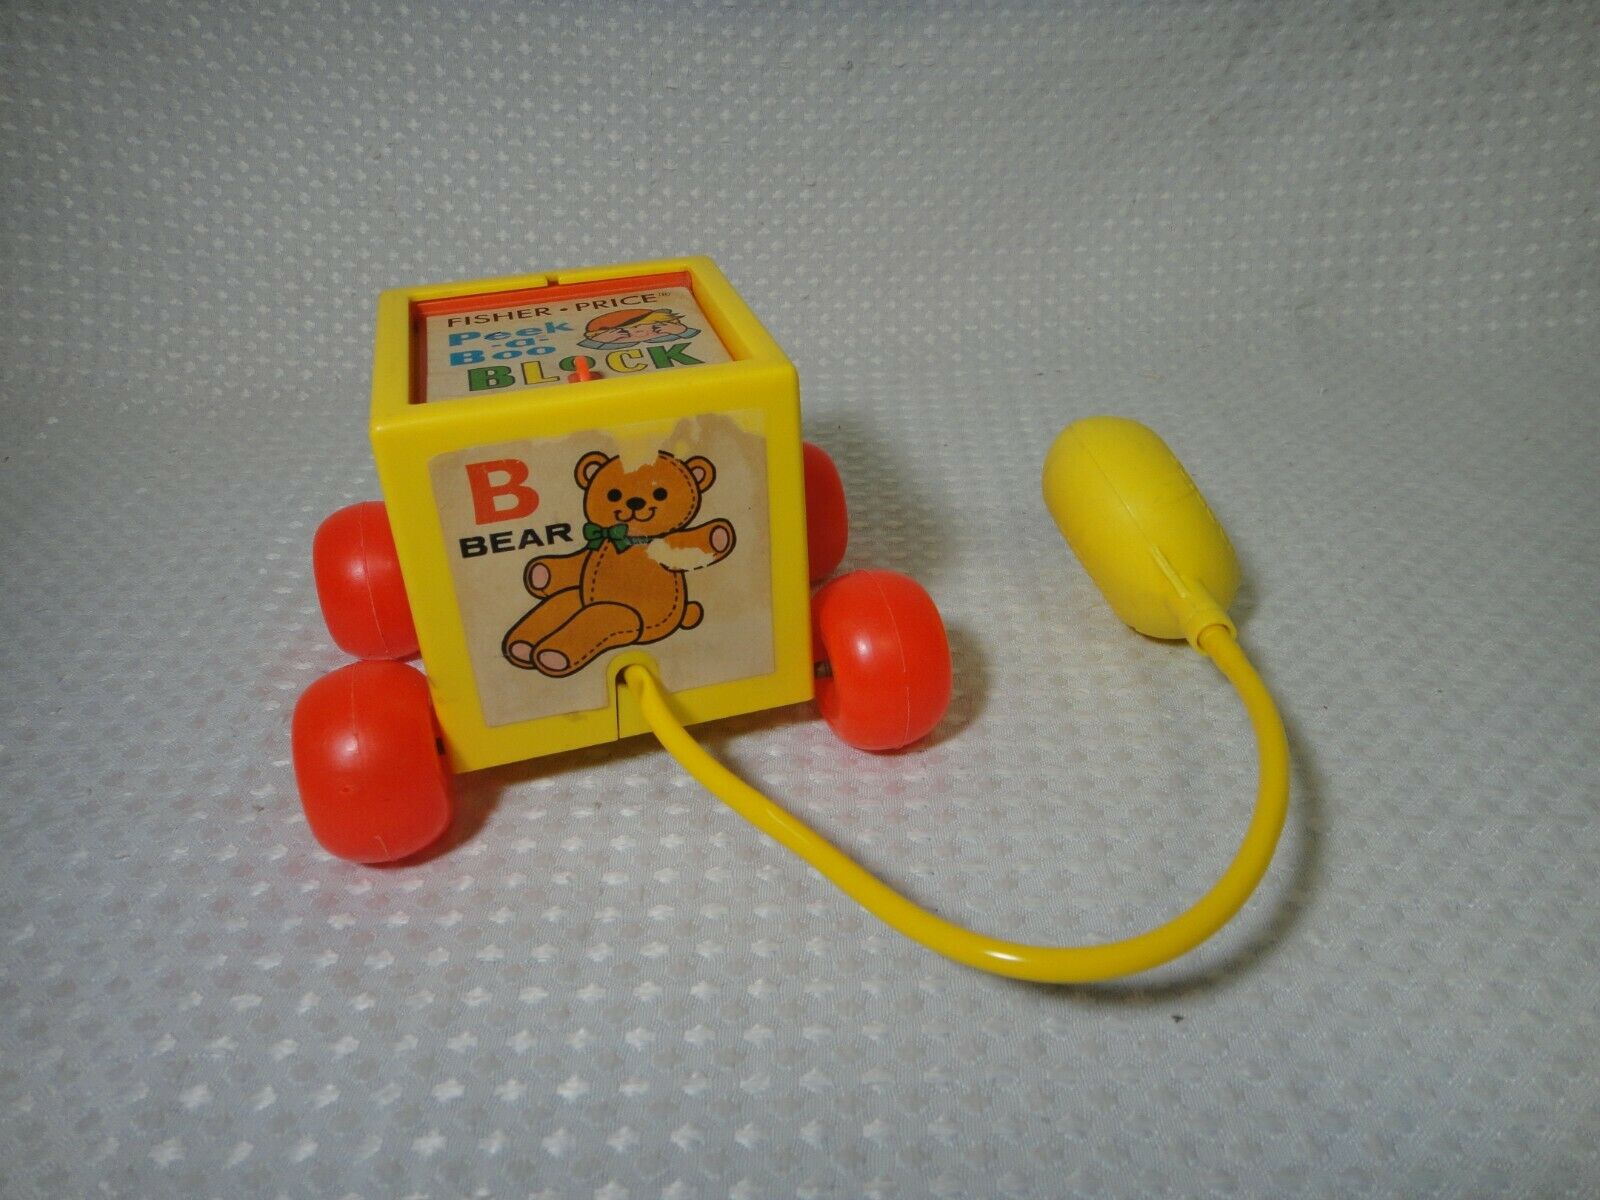 Vintage 1970 Fisher Price Peek A Boo Block Squeeze Bulb Toy # 760